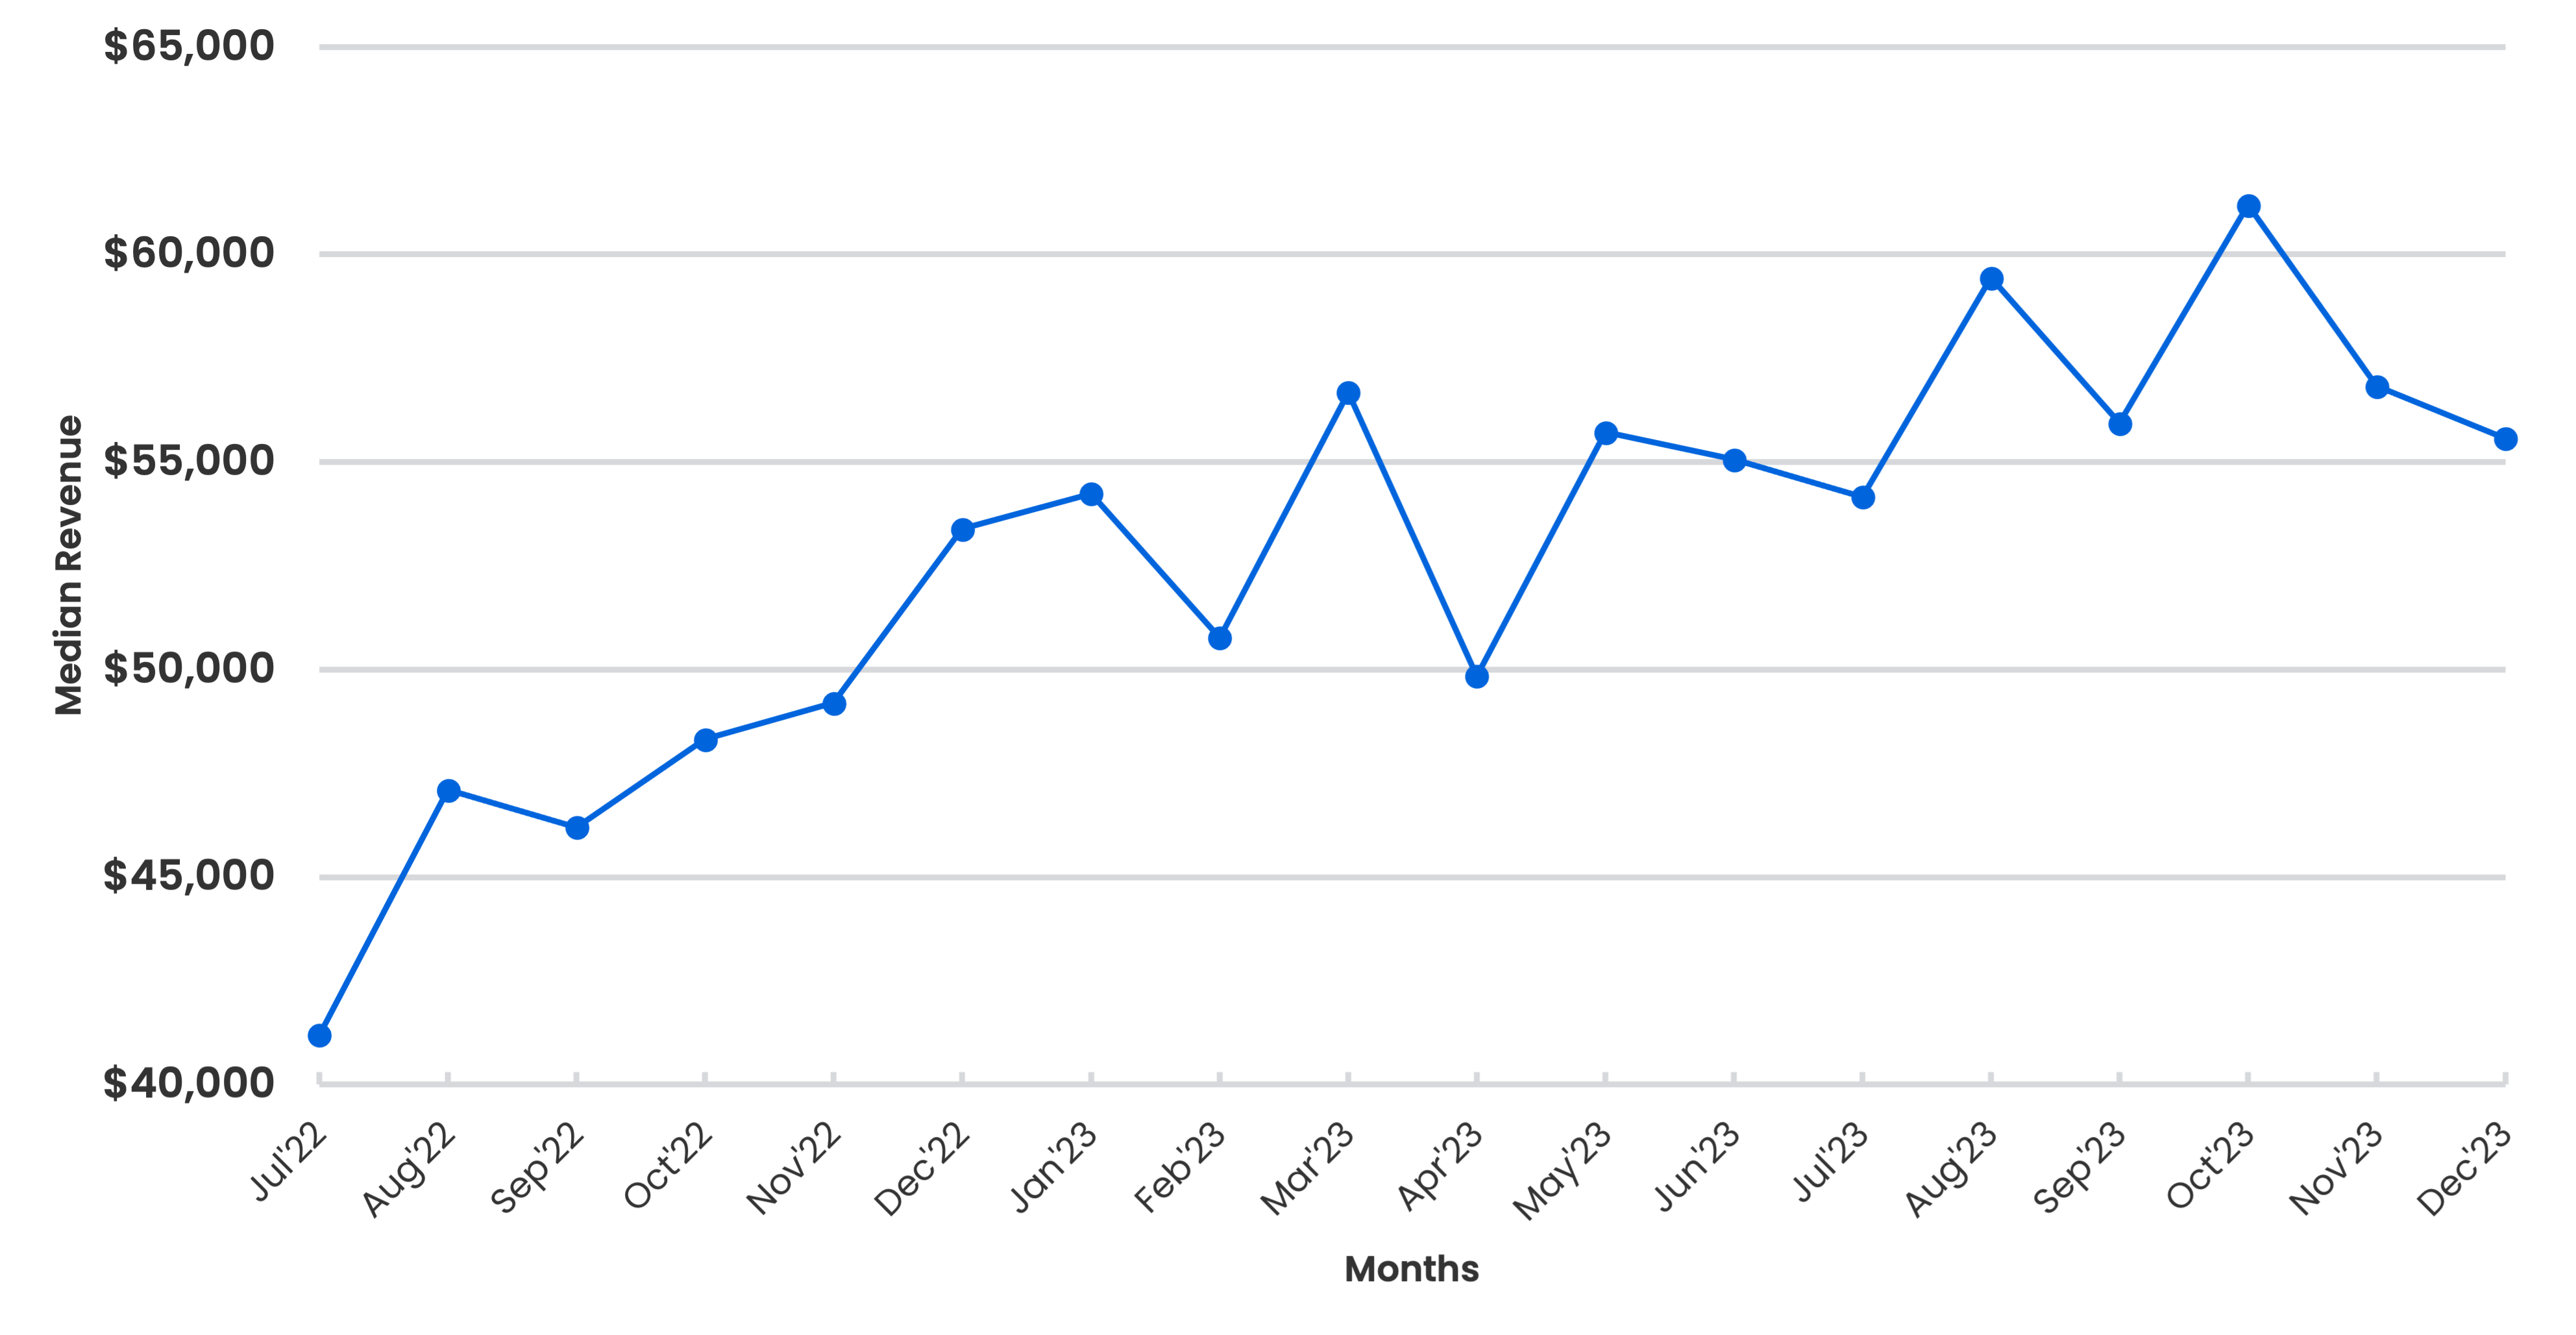 Line graph showing median revenue (Y-axis) reported by small businesses over time by months (X-axis). The line generally displays an unpward trend from $40,000 to over $55,000, an overall 25% growth over the past 18 months.